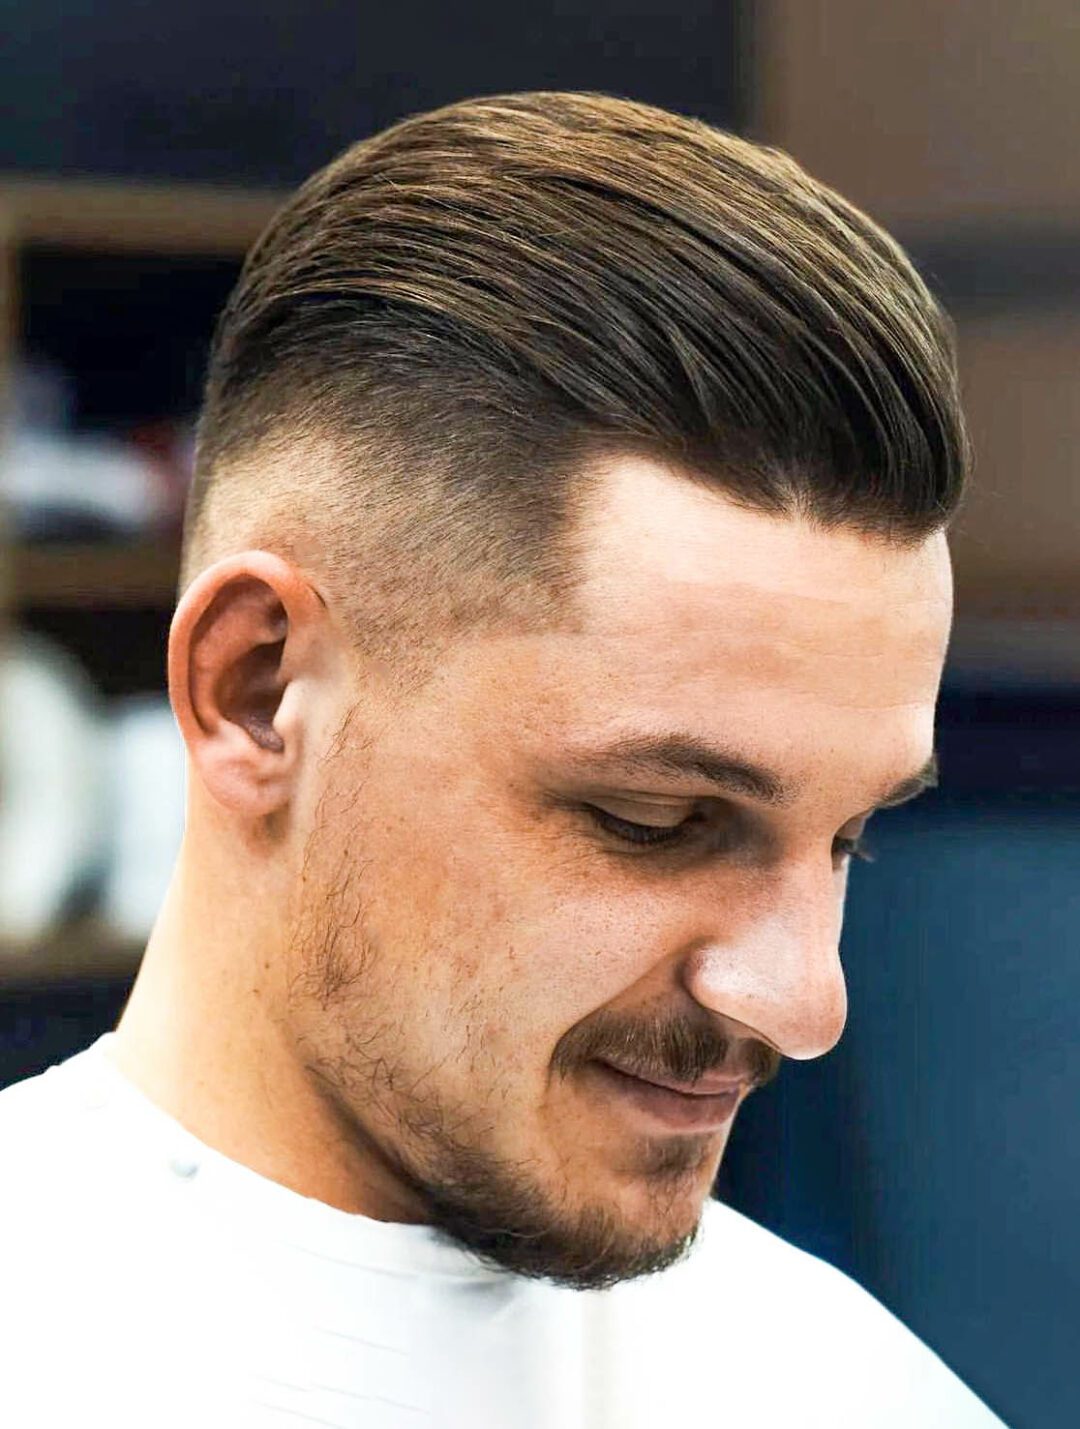 Slicked Back Hairstyles A Classy Style Made Simple Guide